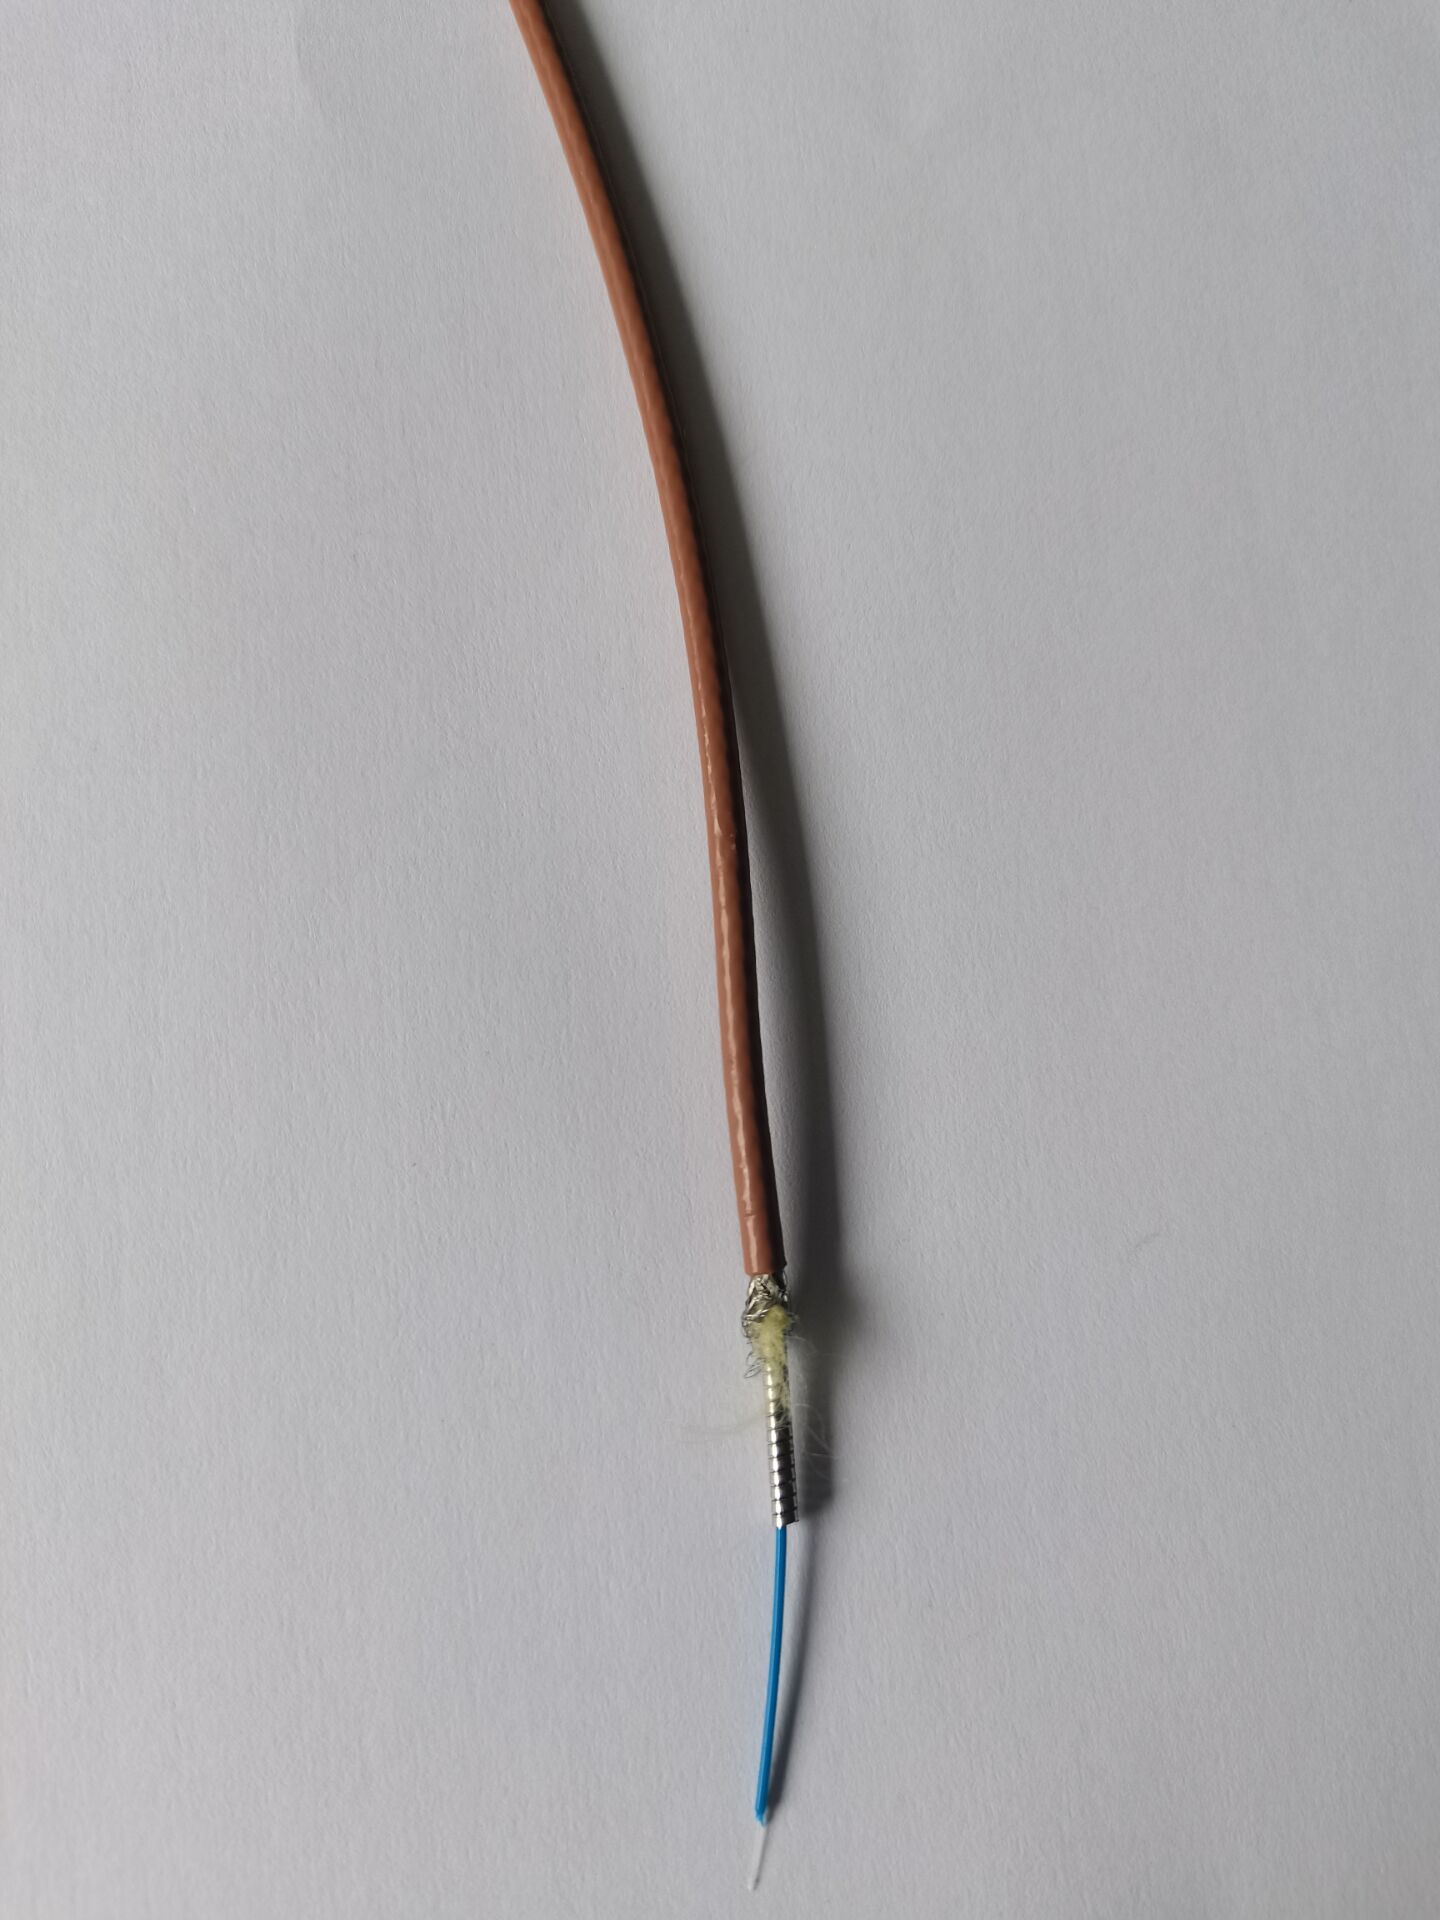 200000Gy Radiation Resistant Single-mode Fibre Cable